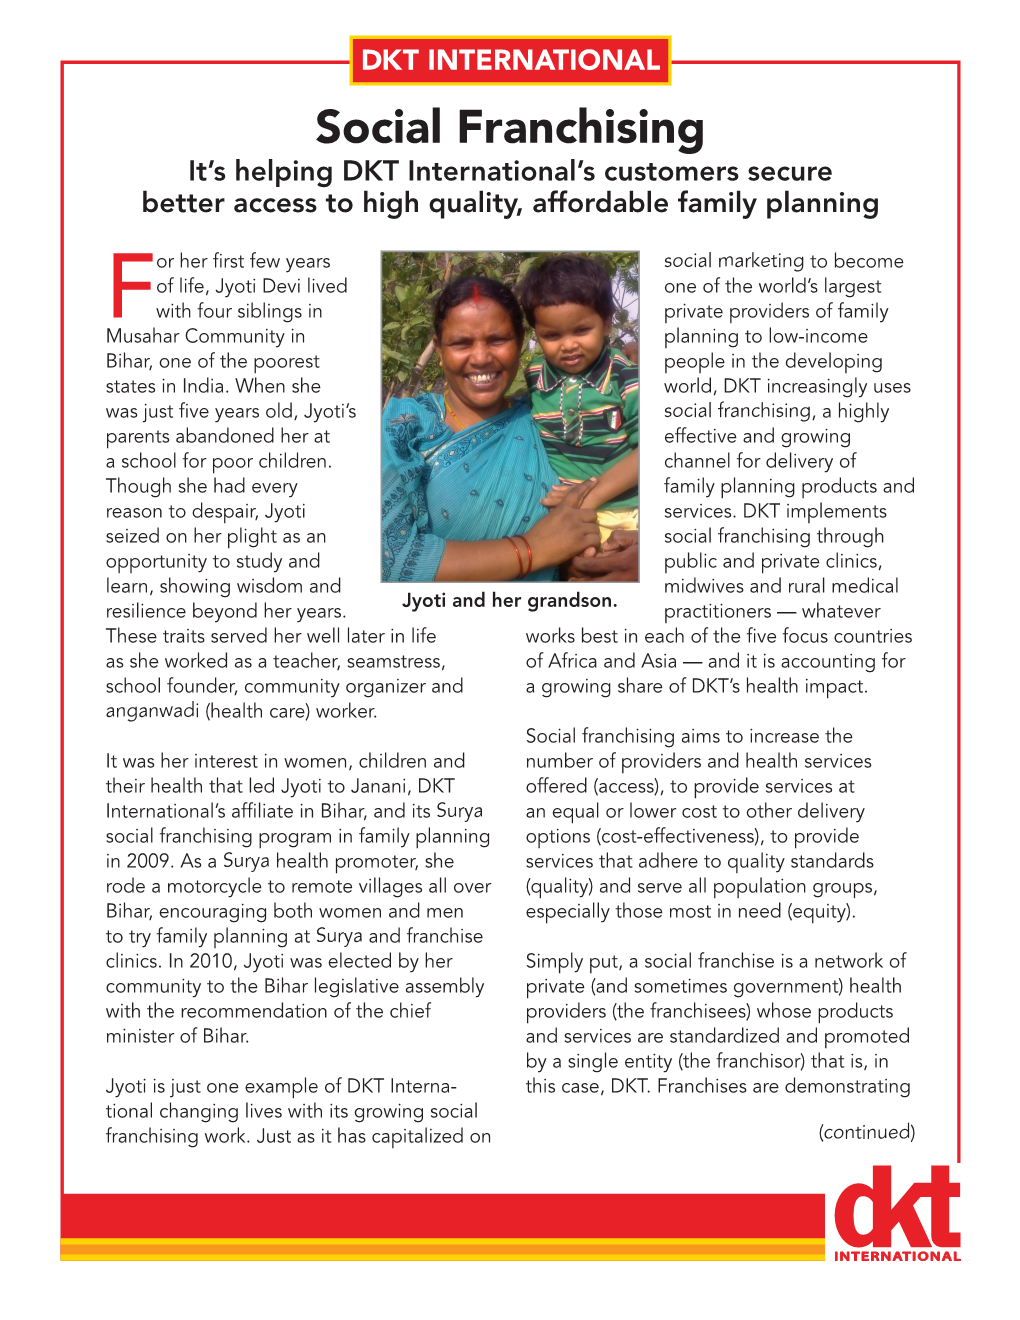 DKT INTERNATIONAL Social Franchising It’S Helping DKT International’S Customers Secure Better Access to High Quality, Affordable Family Planning